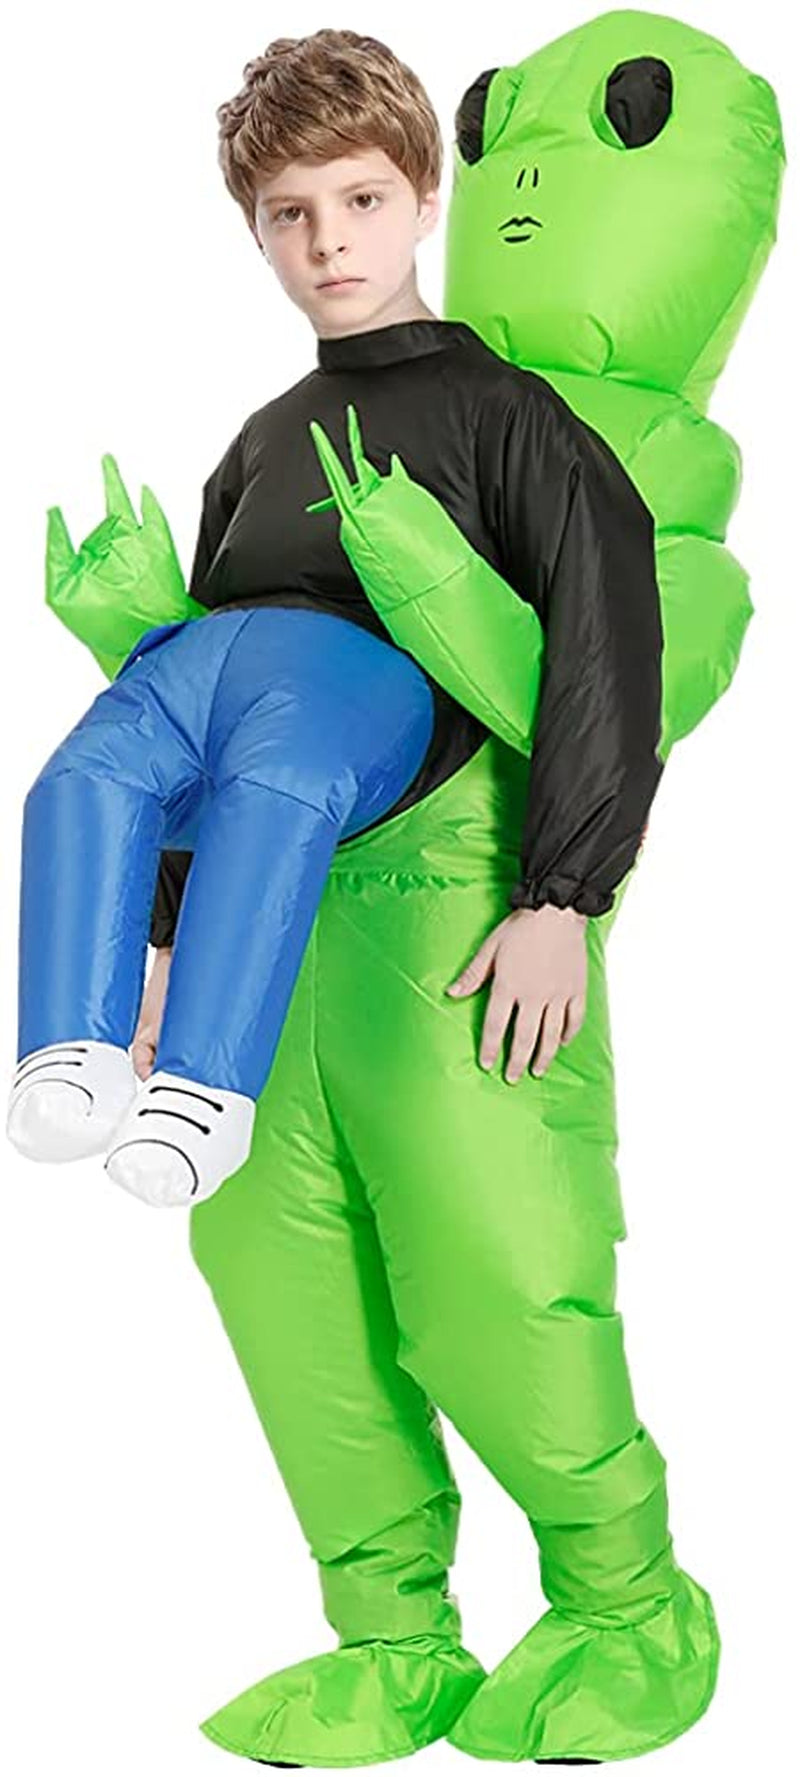 Poptrend Inflatable Alien Costume Inflatable Halloween Costumes Blow up Alien Costume for Halloween, Easter,Christmas…  Poptrend Teens Alien  